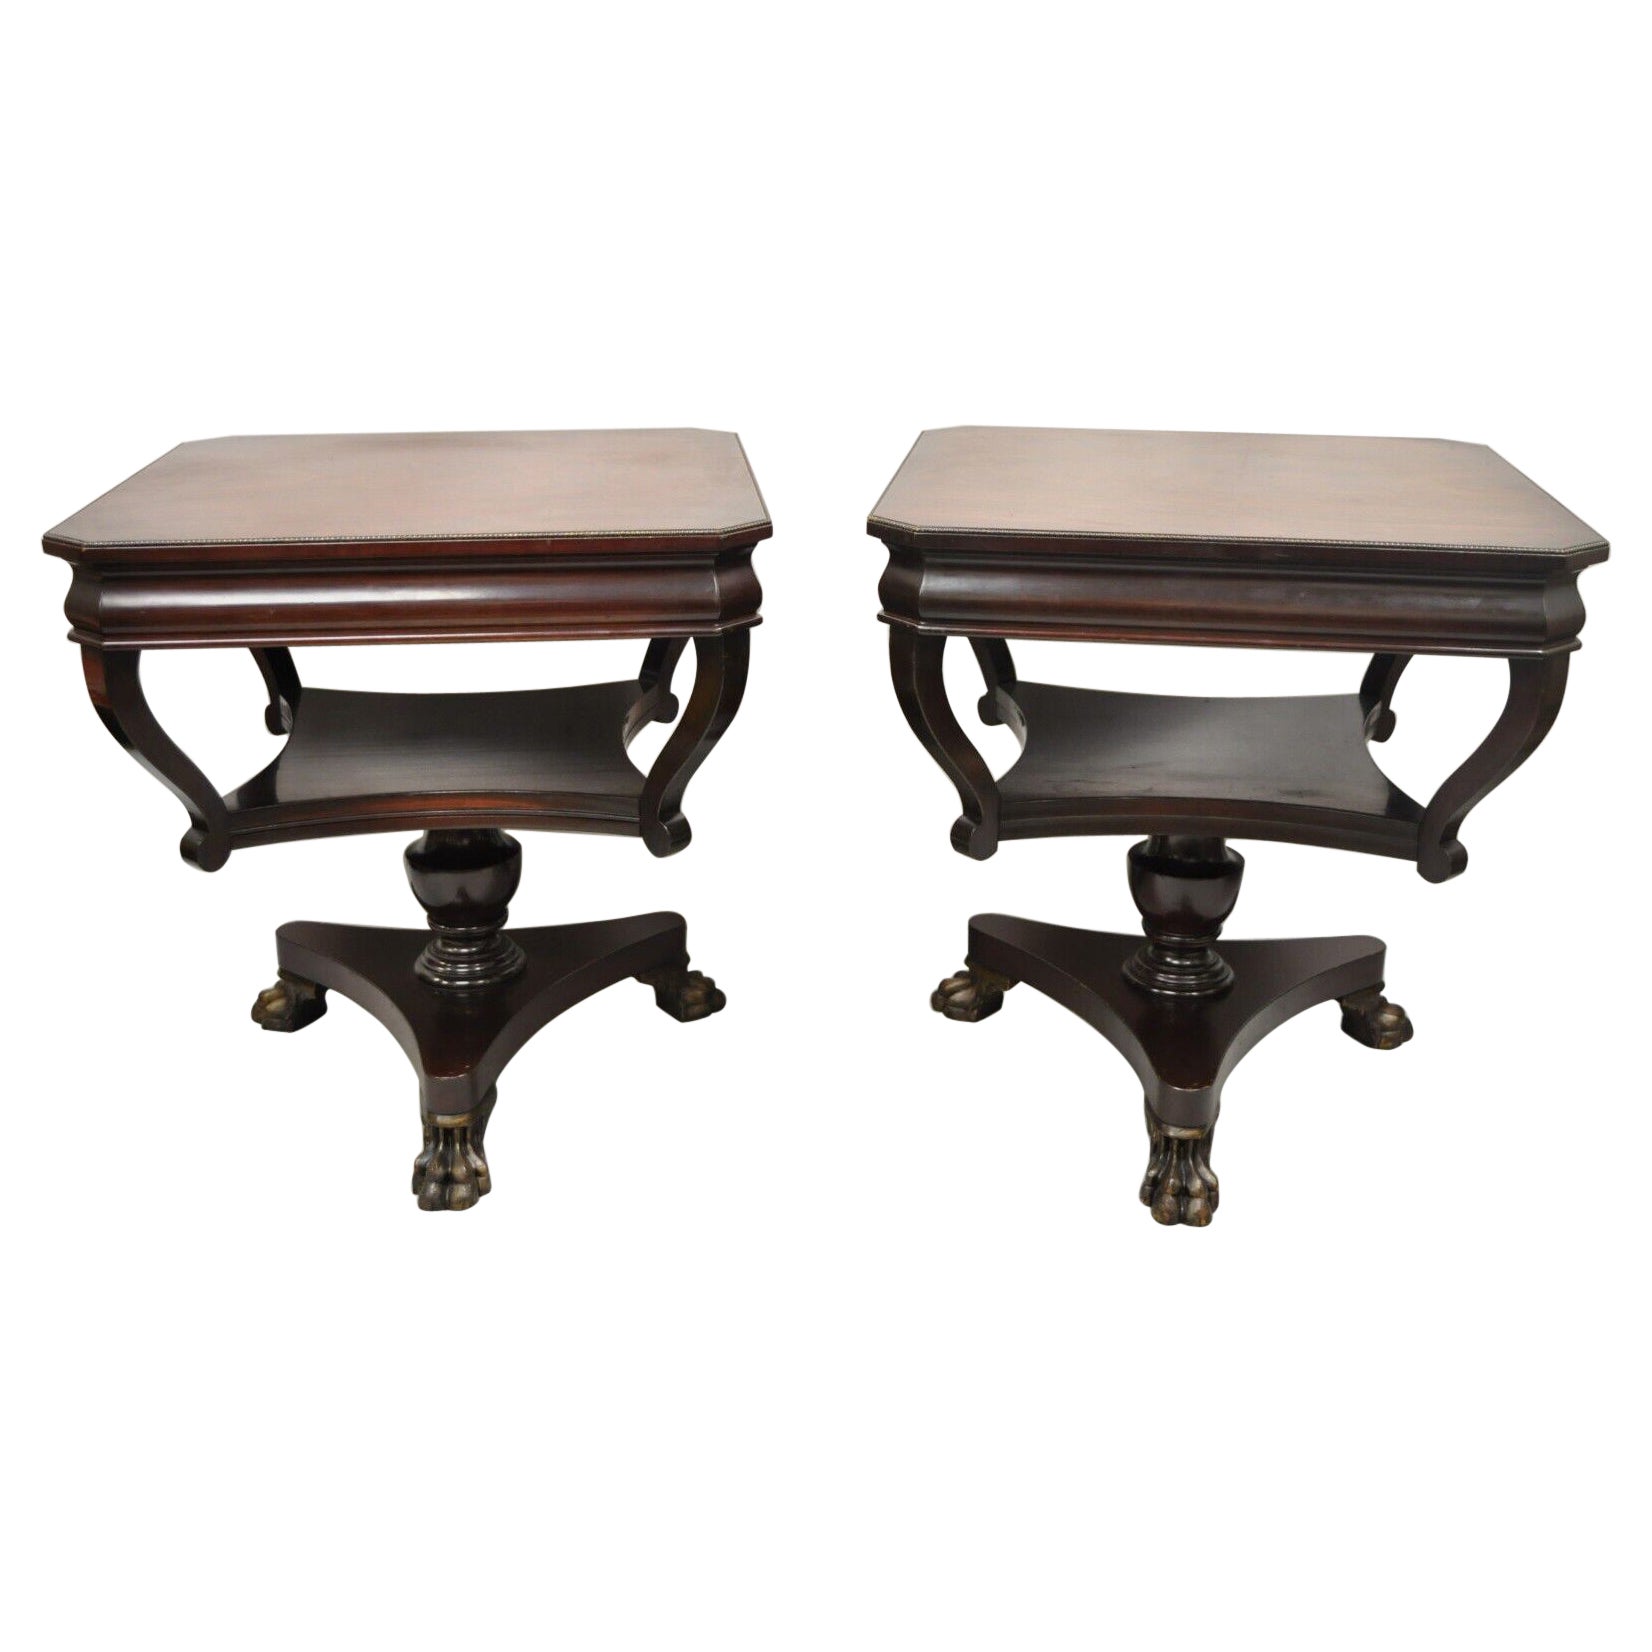 Vintage French Empire Style Mahogany Paw Feet Side Tables, a Pair For Sale